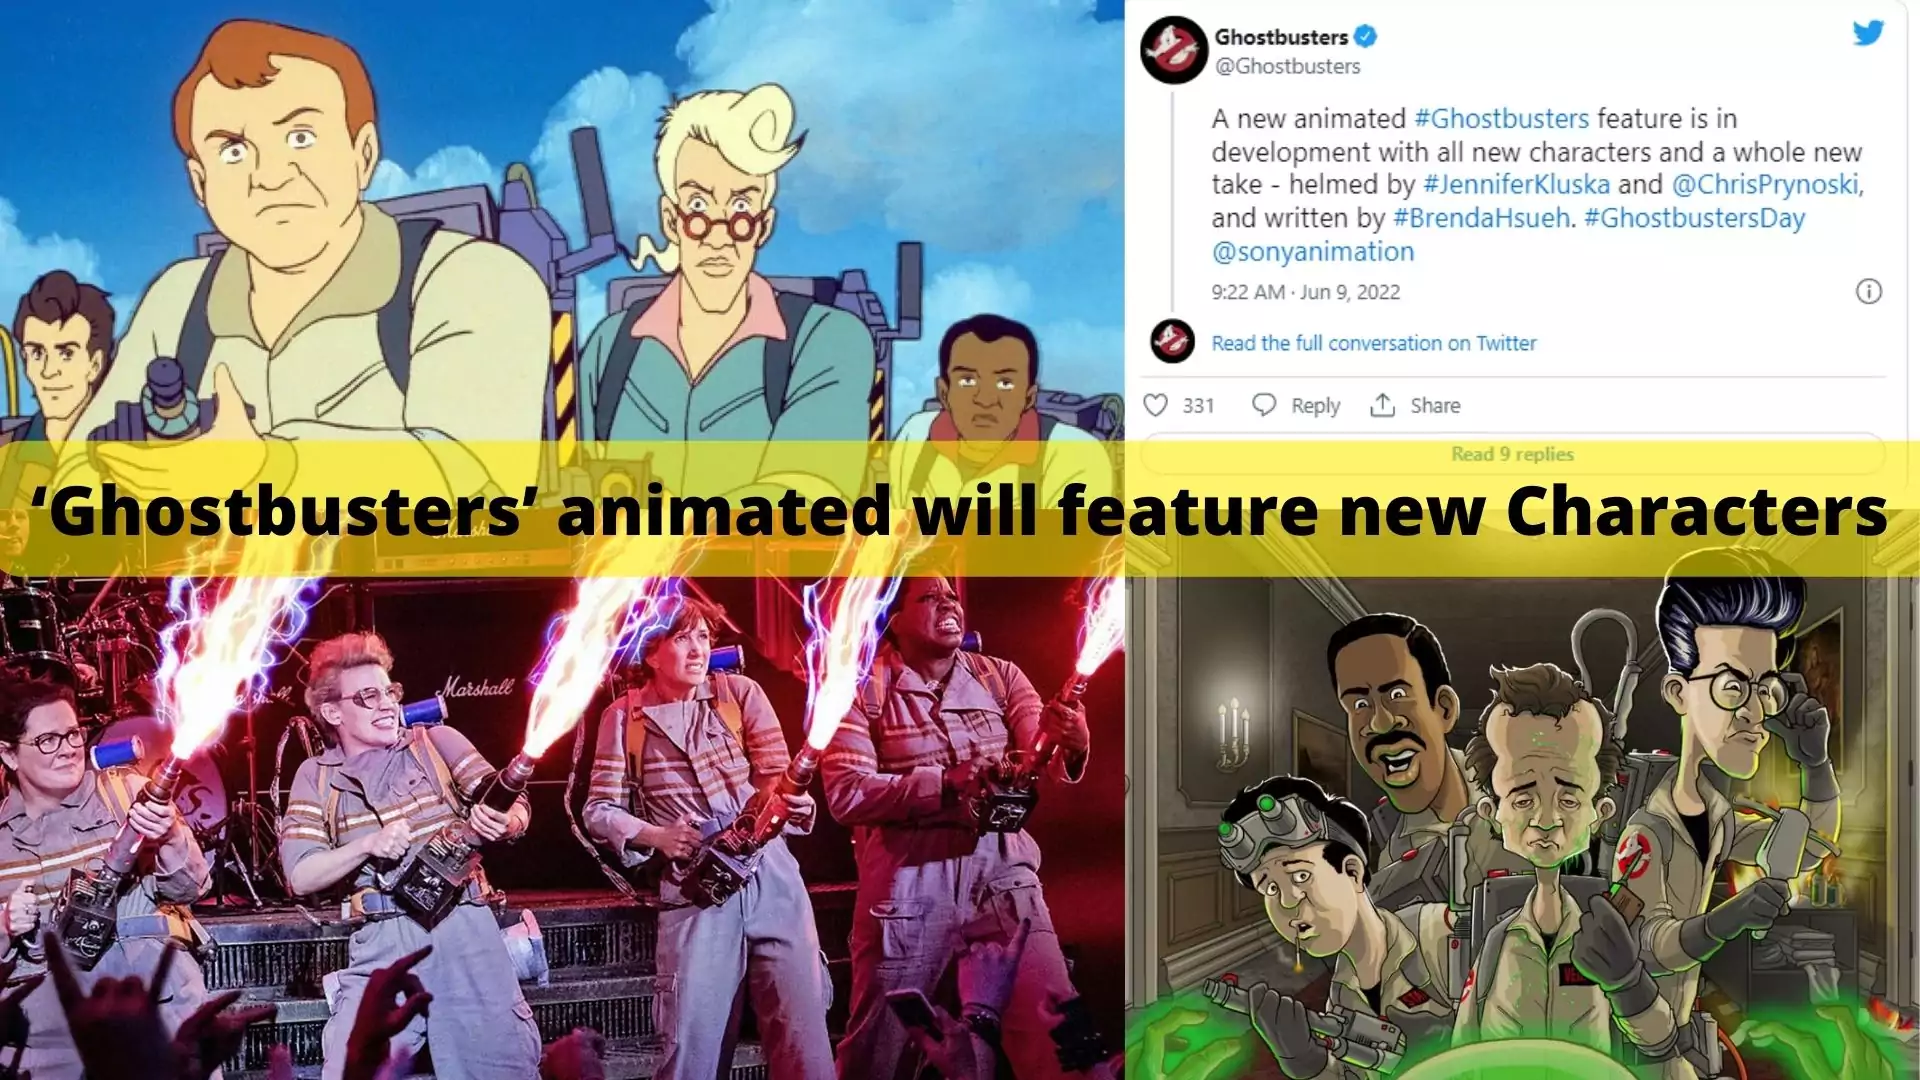 ‘Ghostbusters’ animated will feature new Characters